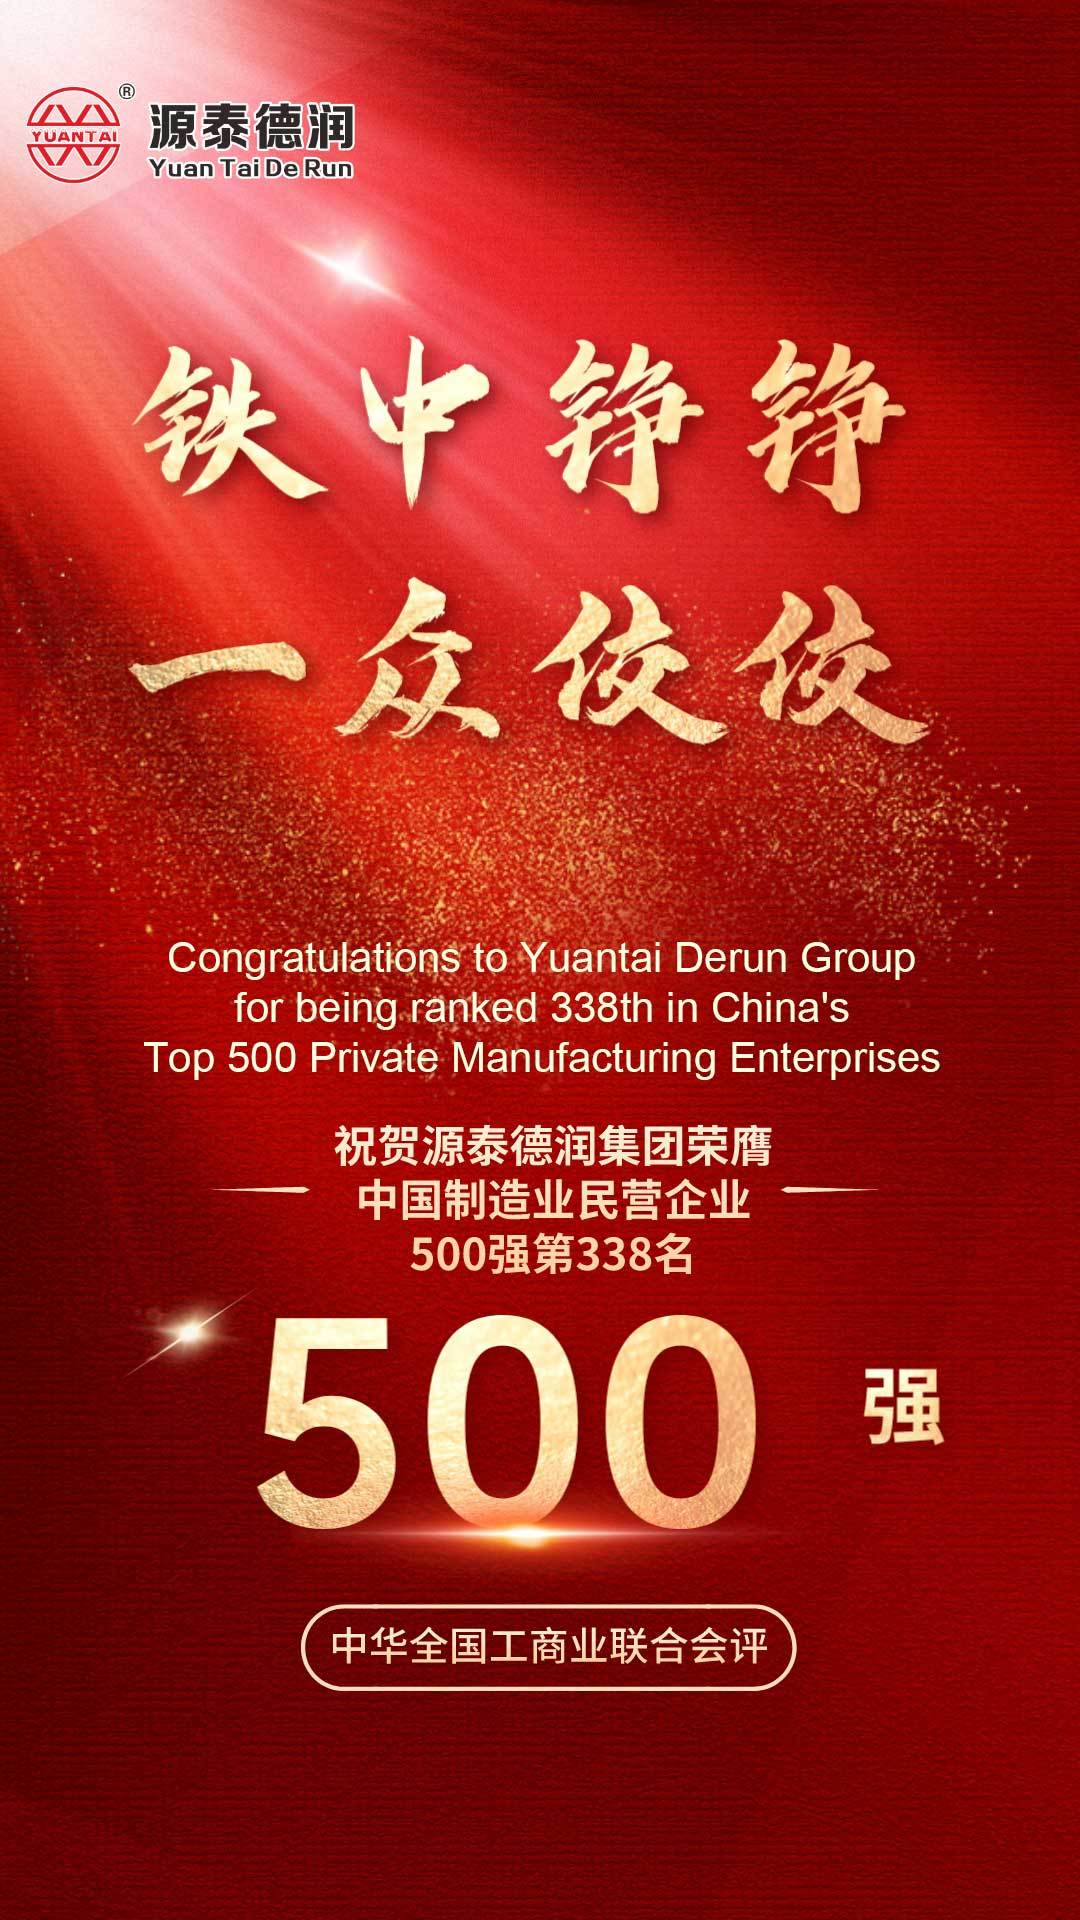 Congratulations-to-Tianjin-Yuantai-Derun-Group-on-being-awarded-the-top-500-private-manufacturing-companies-in-China